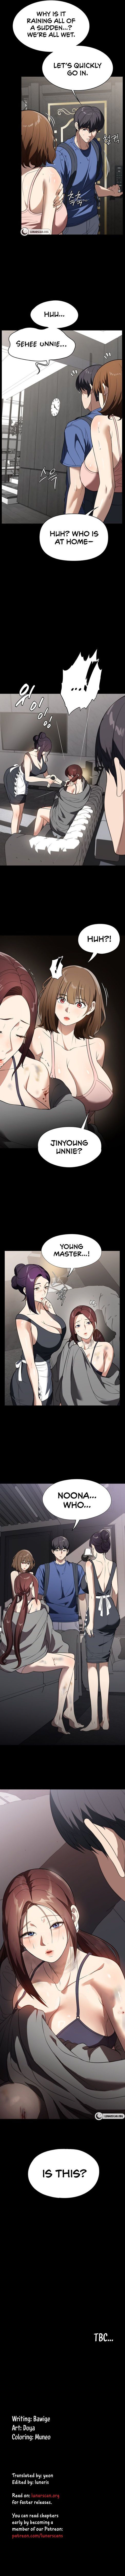 young-housemaid-chap-39-6